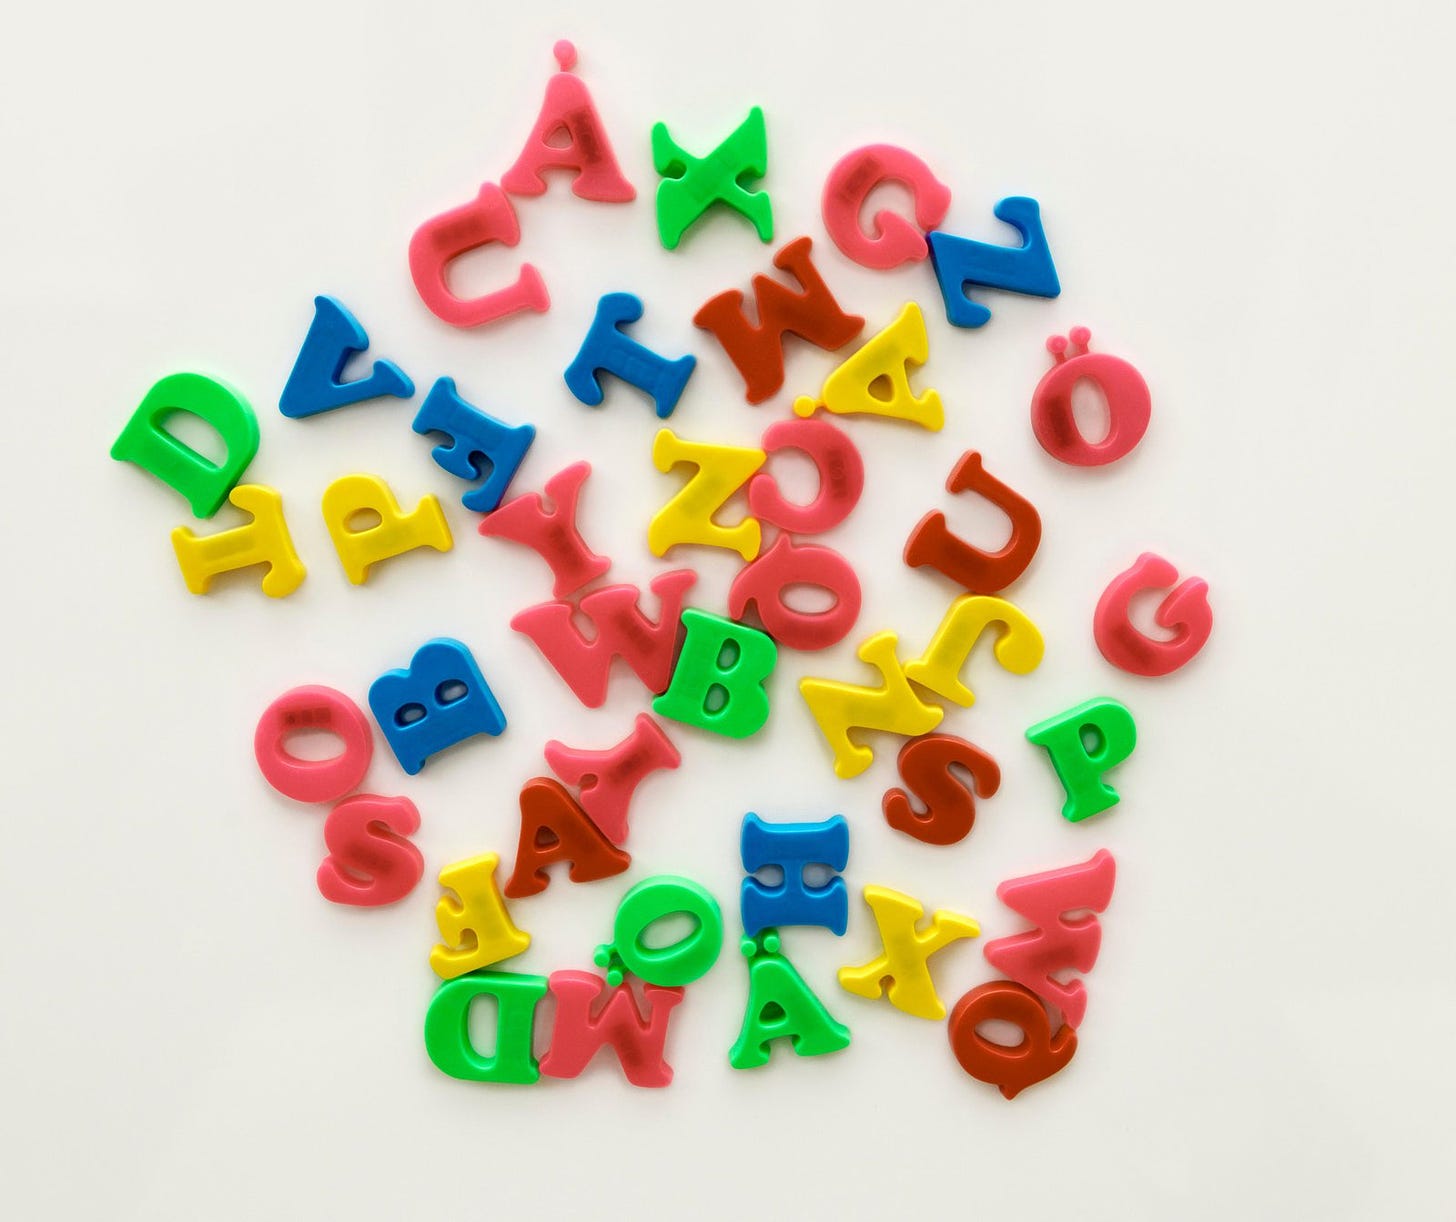 Colorful letter magnets in a jumble on a white background